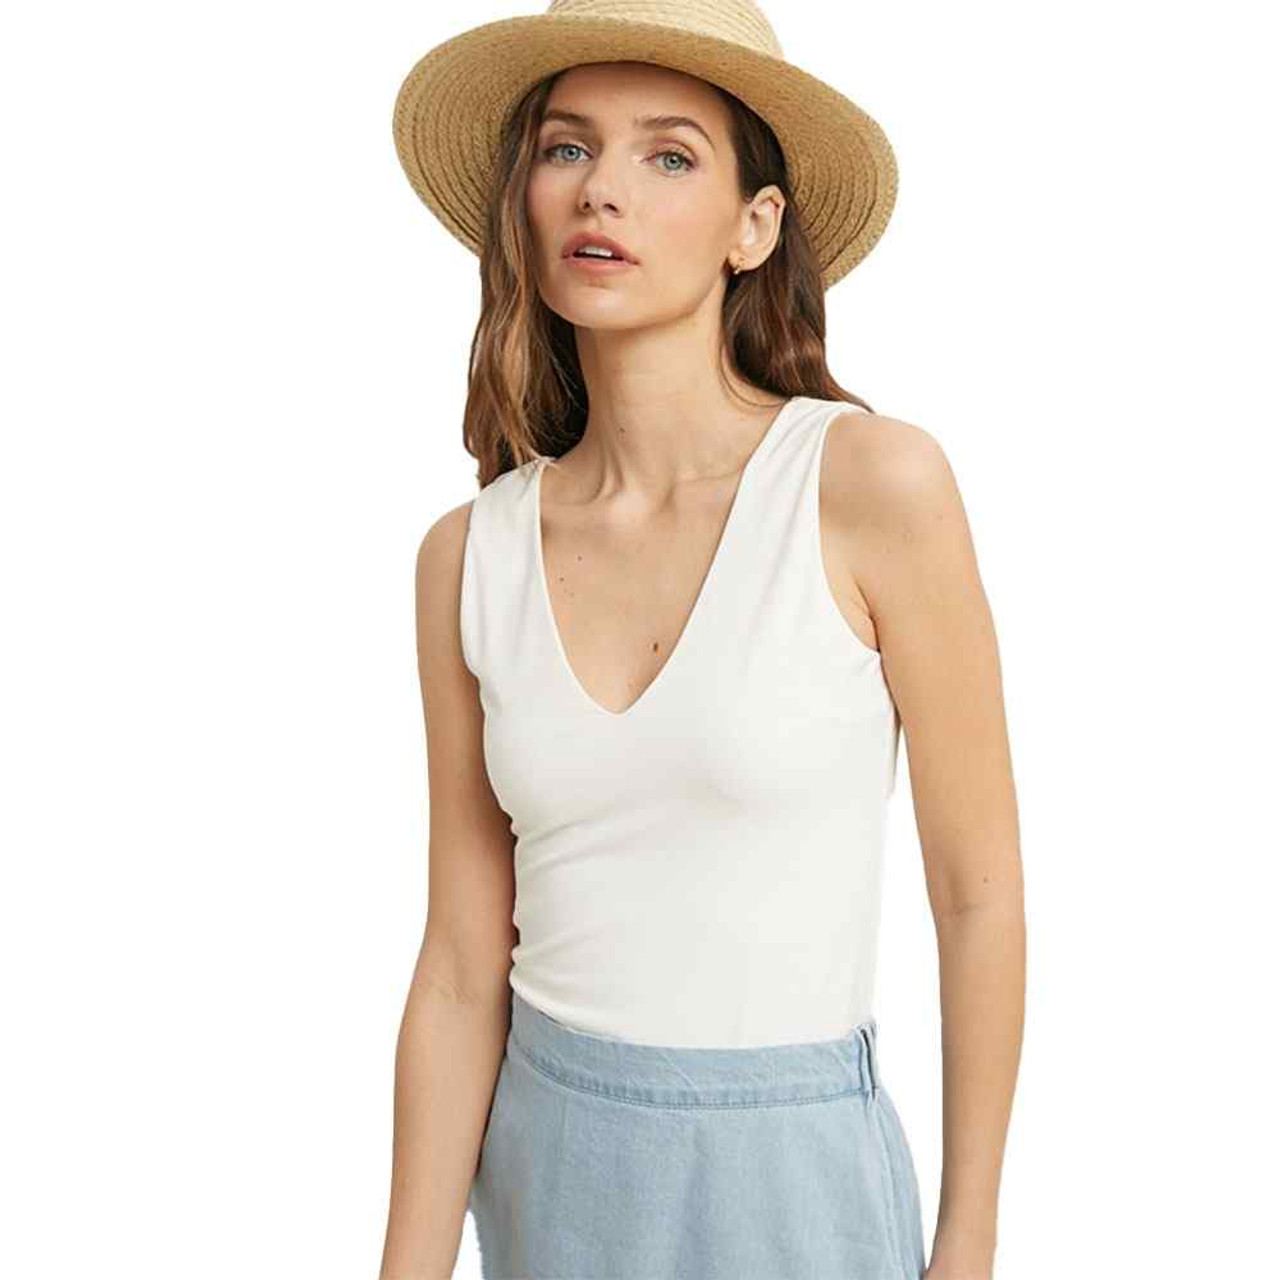 https://cdn11.bigcommerce.com/s-zut1msomd6/images/stencil/1280x1280/products/32989/224445/WISHLIST-WOMENS-W_SOOTHING_BODYSUIT-W22-6459-OFFWHITW-FRONT__92456.1668452420.jpg?c=1